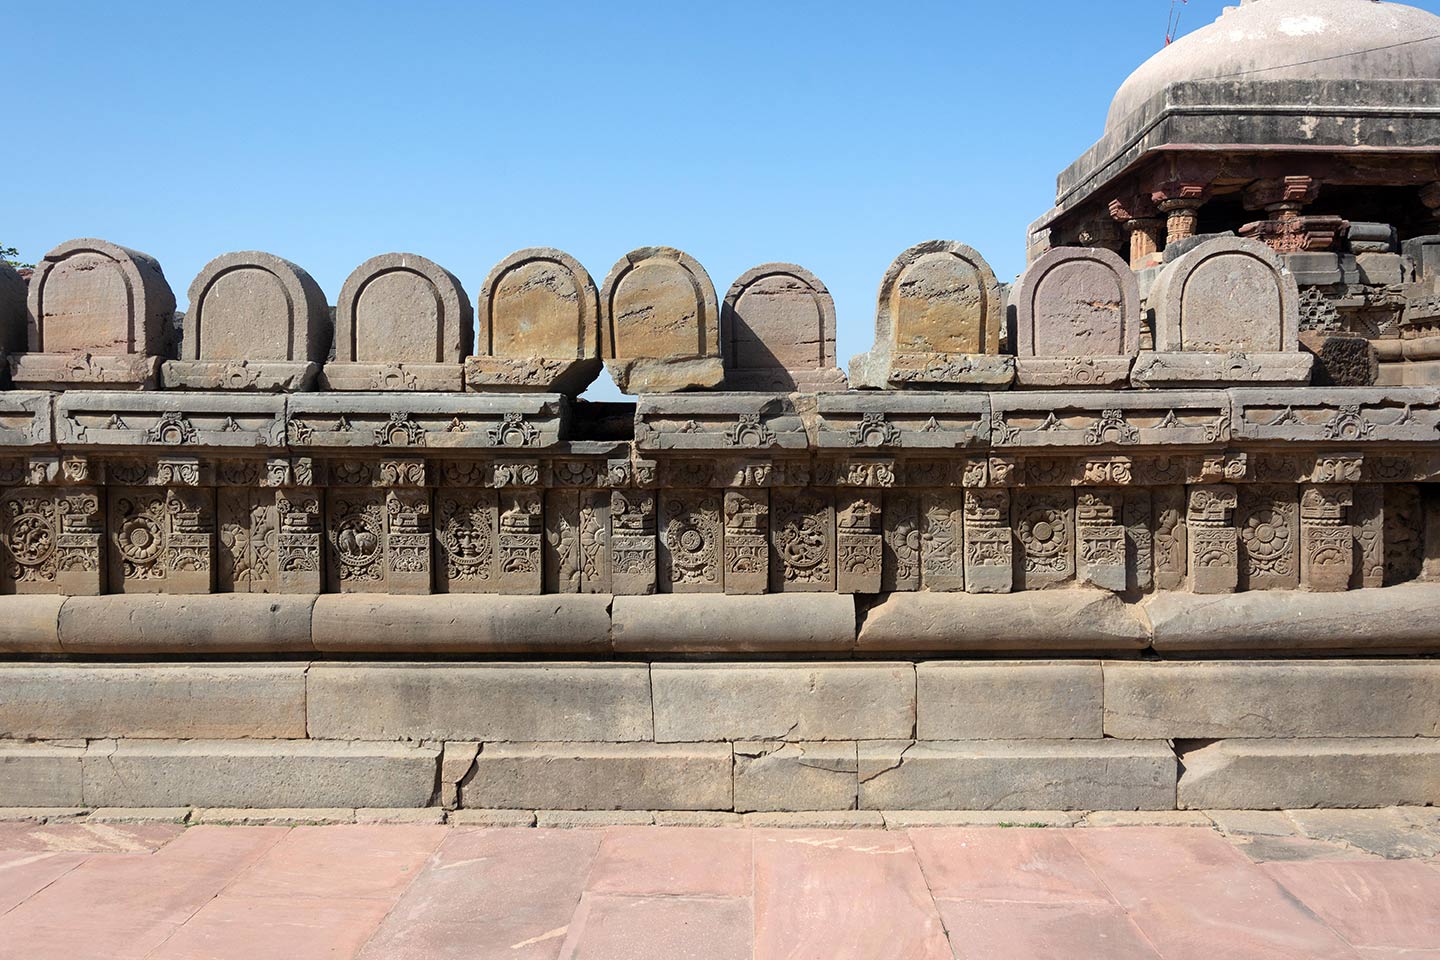 U-shaped rounded stones are assembled on the parapet, but their position or purpose in the original temple is unknown. The central artwork of the plaque is in the form of a circular medallion surrounded by a foliage motif. The plaques are separated by squat pillars which have a square base, an octagonal shaft, and a square capital.